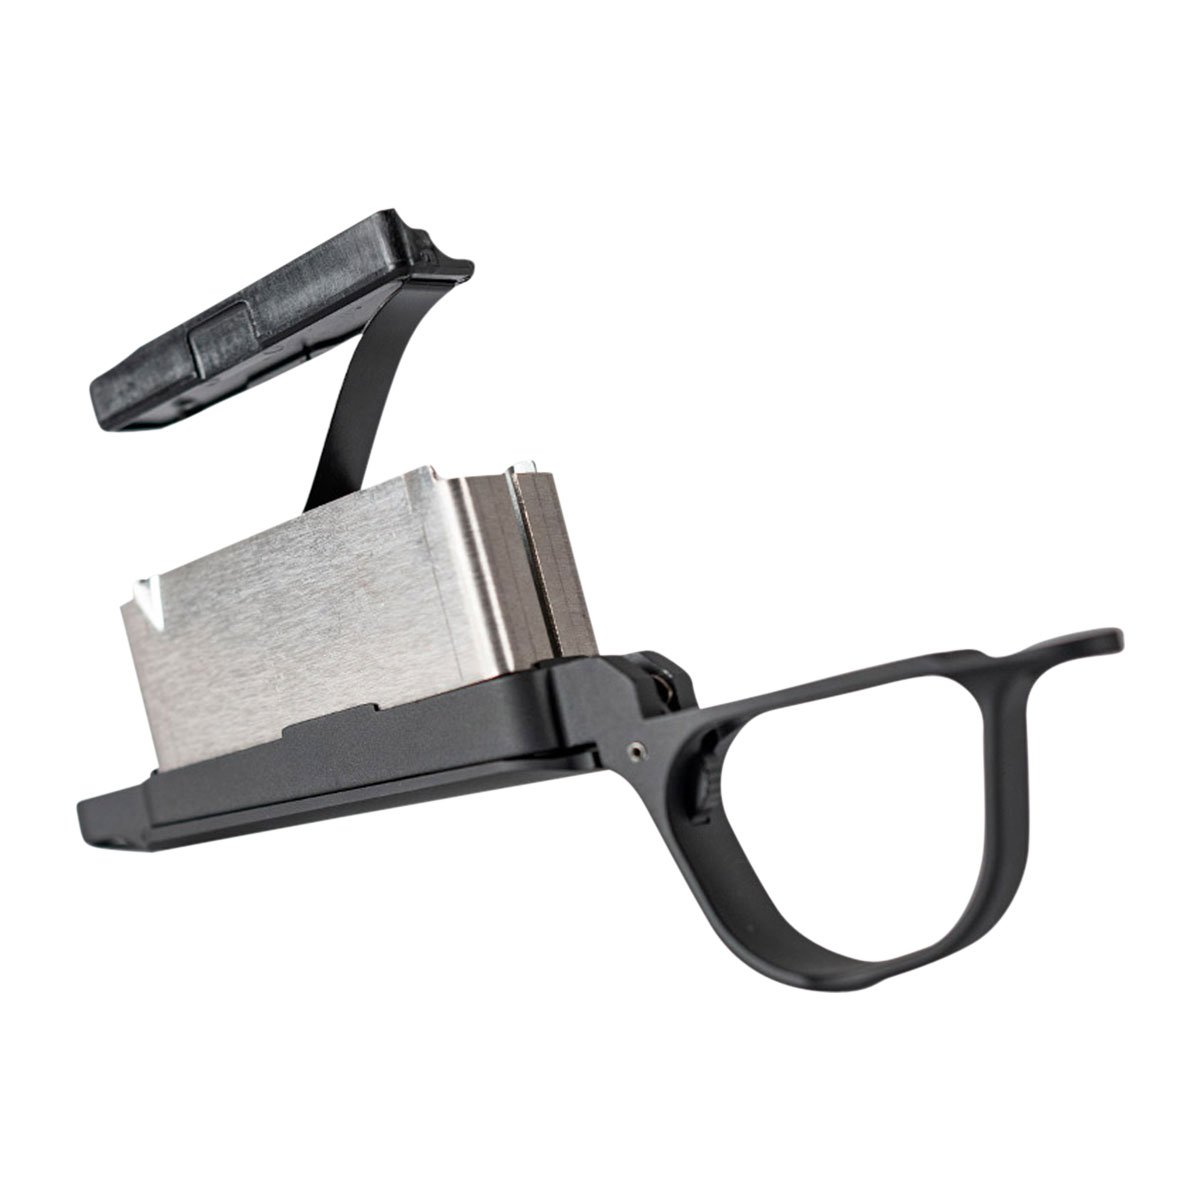 CHRISTENSEN ARMS - SHORT ACTION BOTTOM METAL ASSEMBLY WITH INTERNAL MAGAZINE